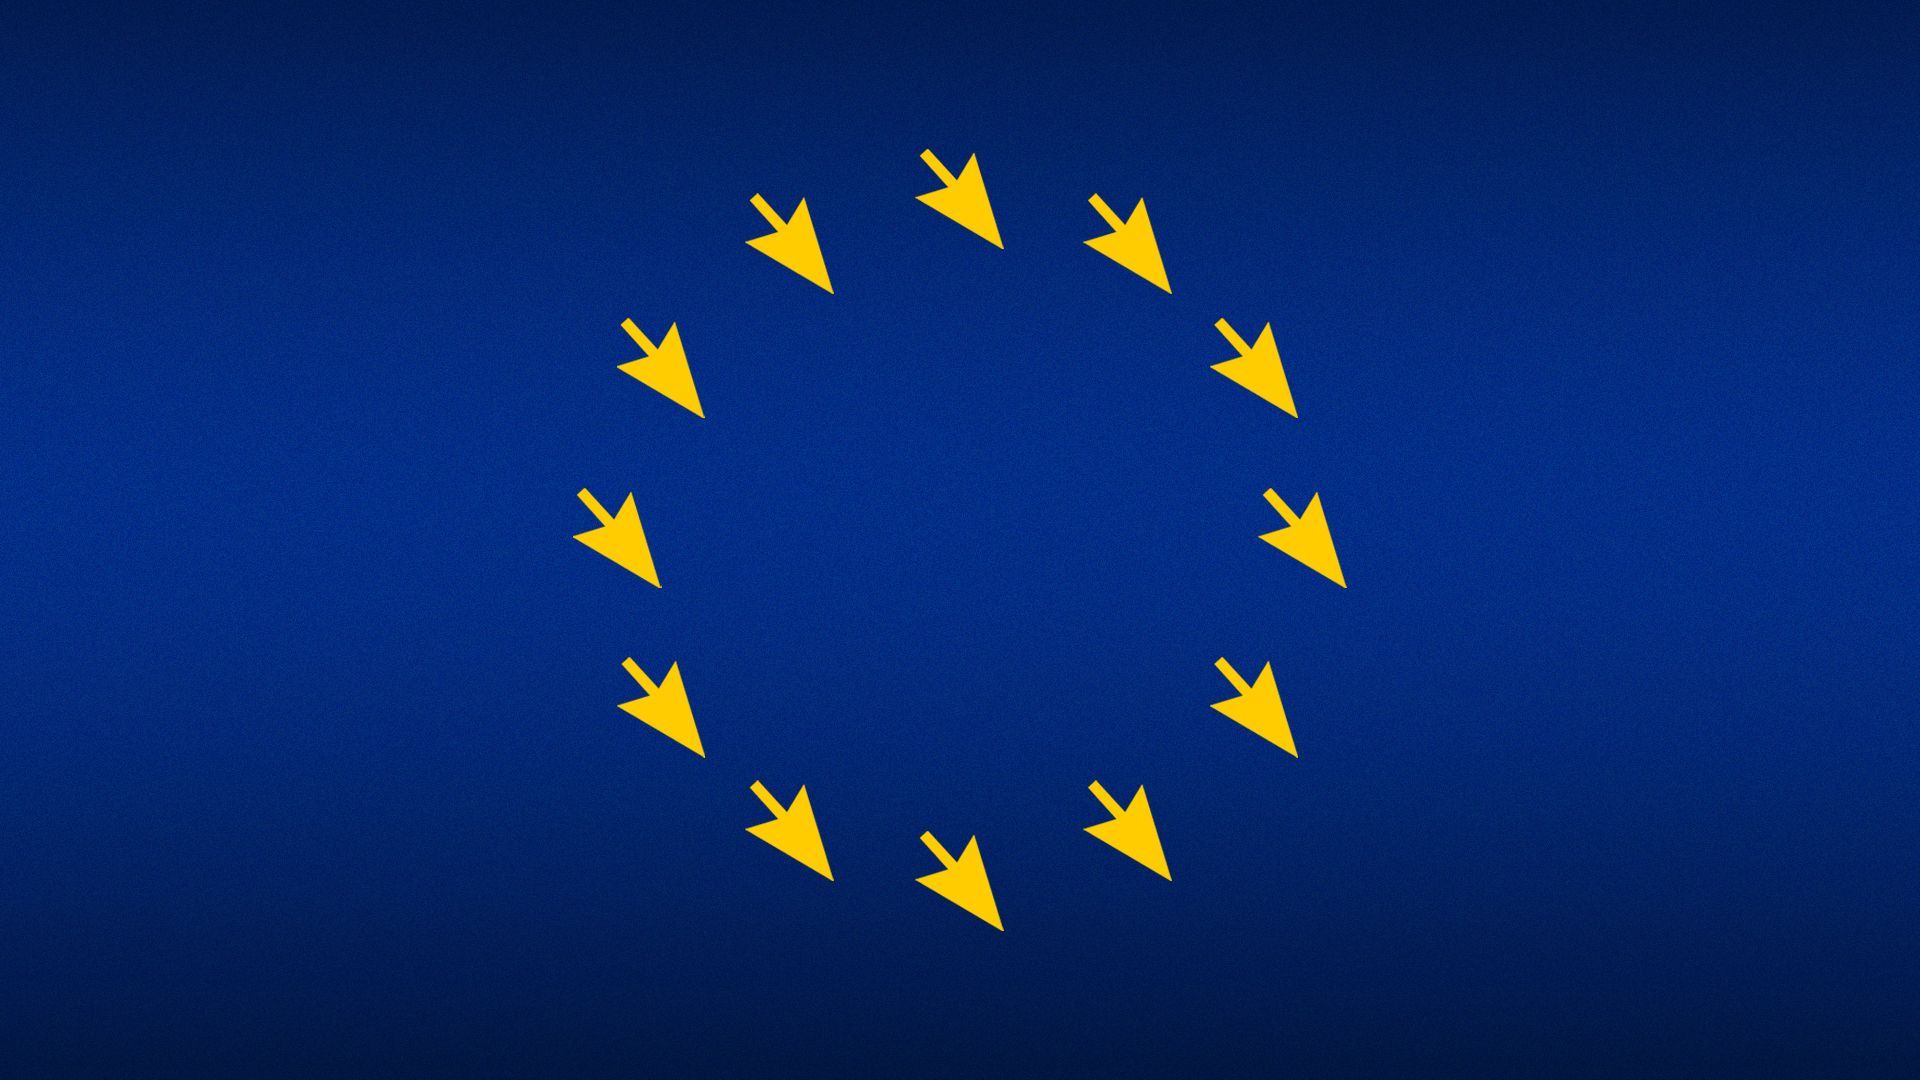 Illustration of the EU flag with downward facing cursor arrows in place of stars